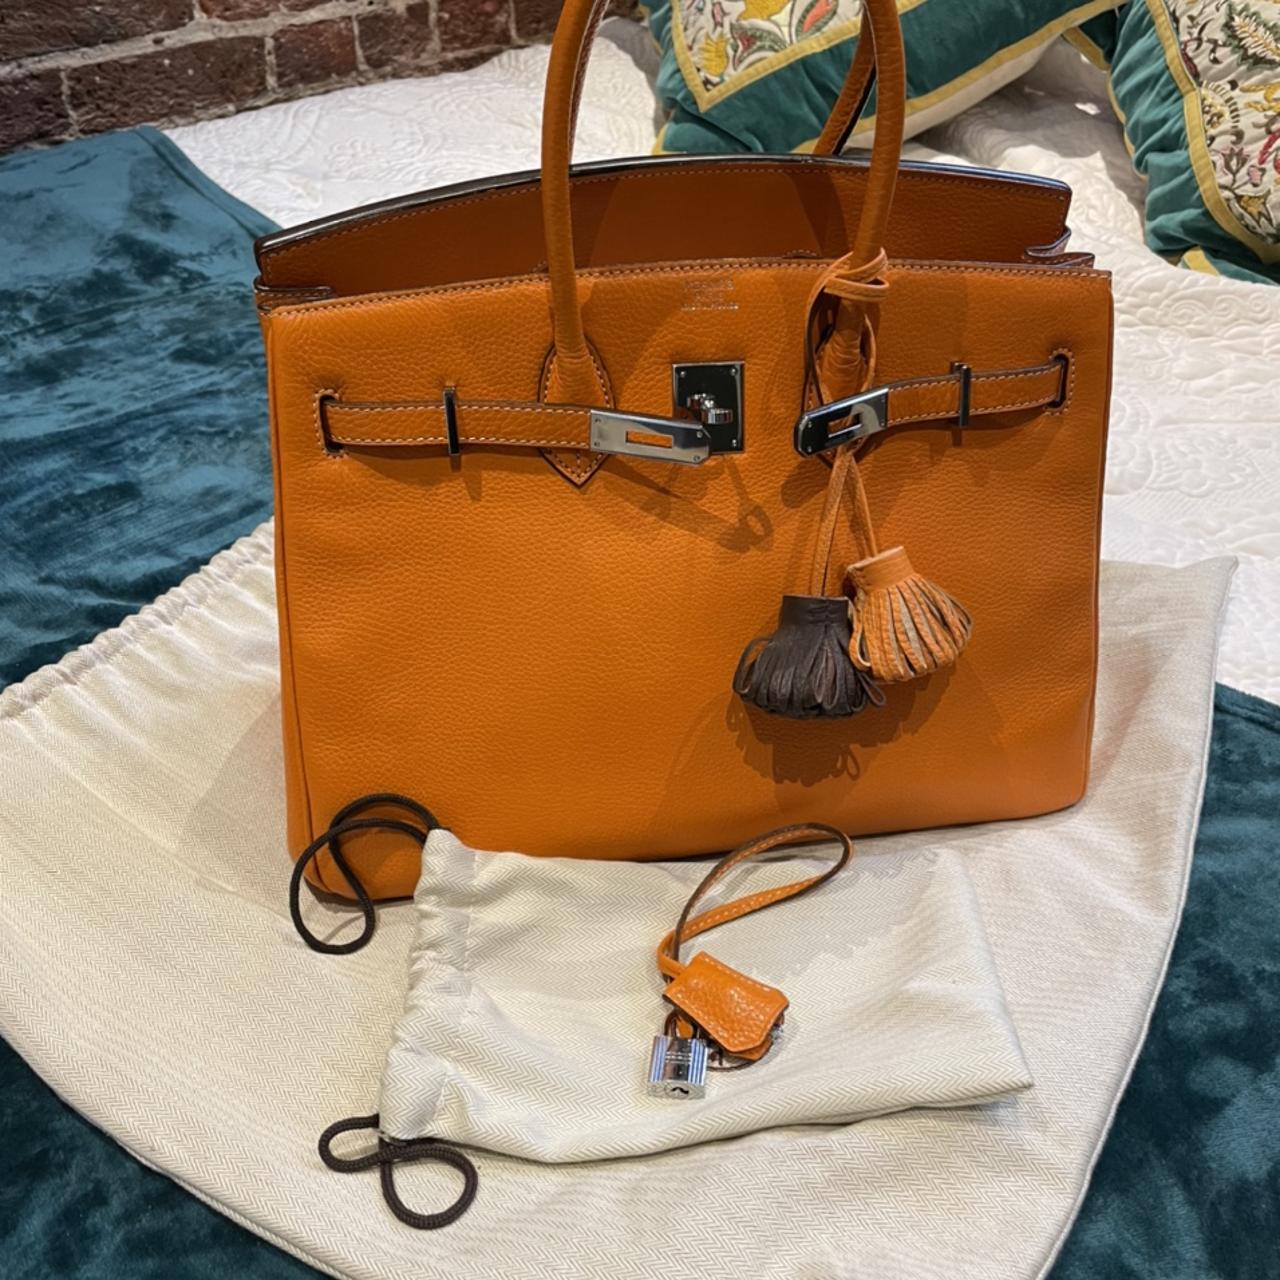 Authentic Hermes Herline Tote Bag It can be use as - Depop